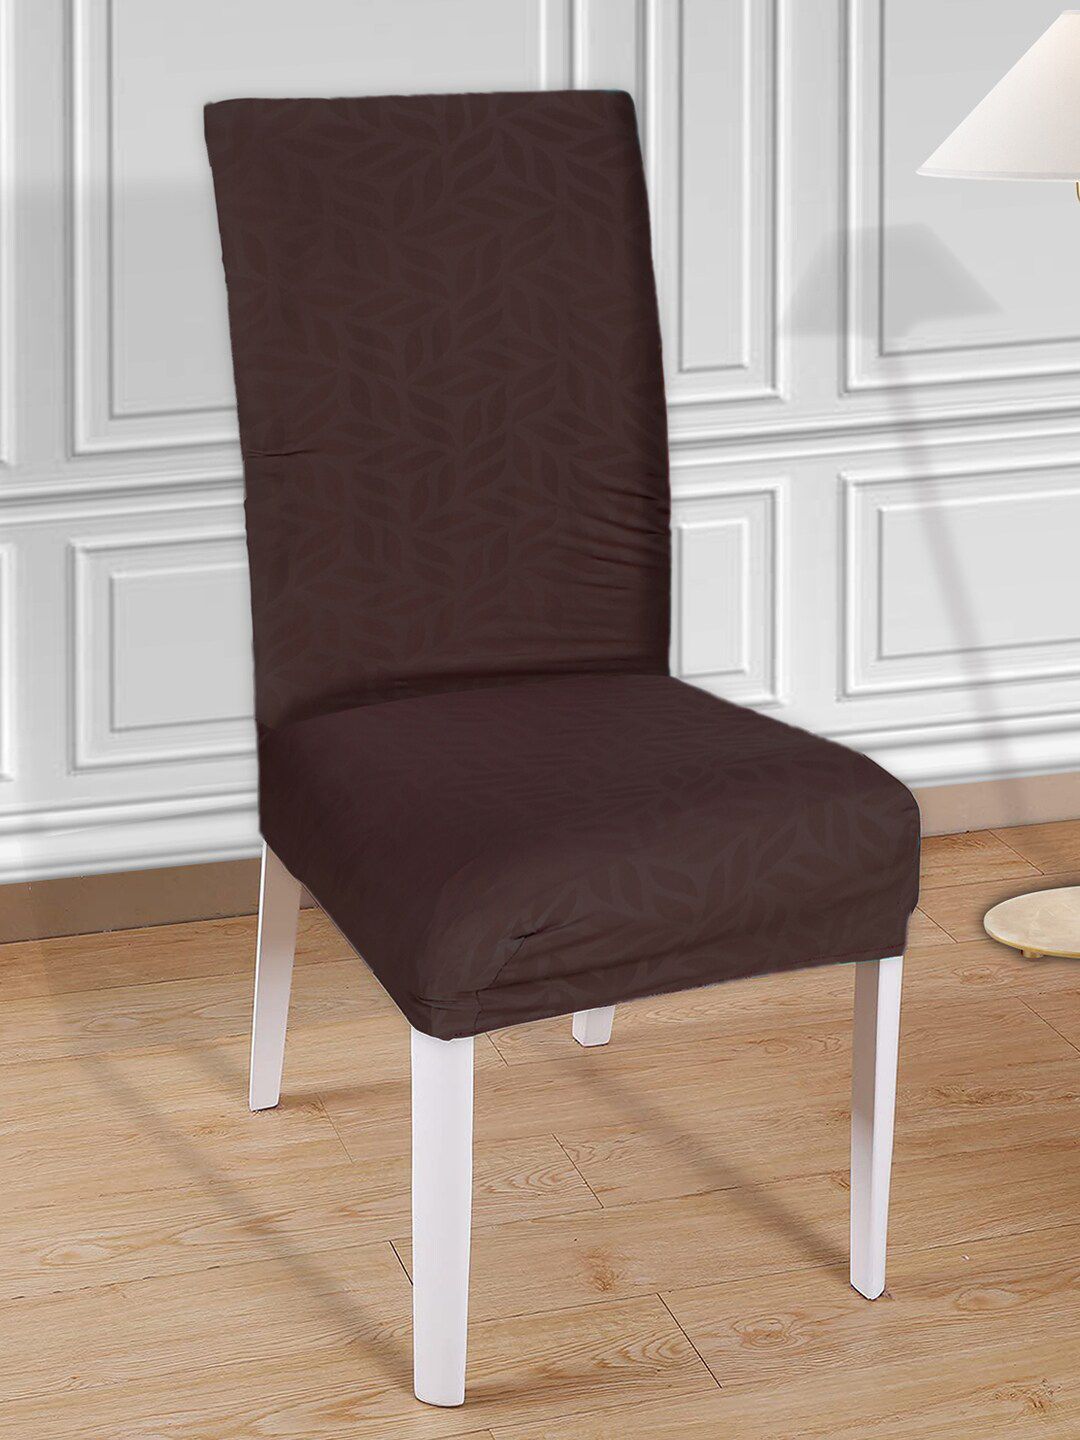 Kuber Industries Brown Leaf Printed Elastic Stretchable Polyster Chair Cover Price in India